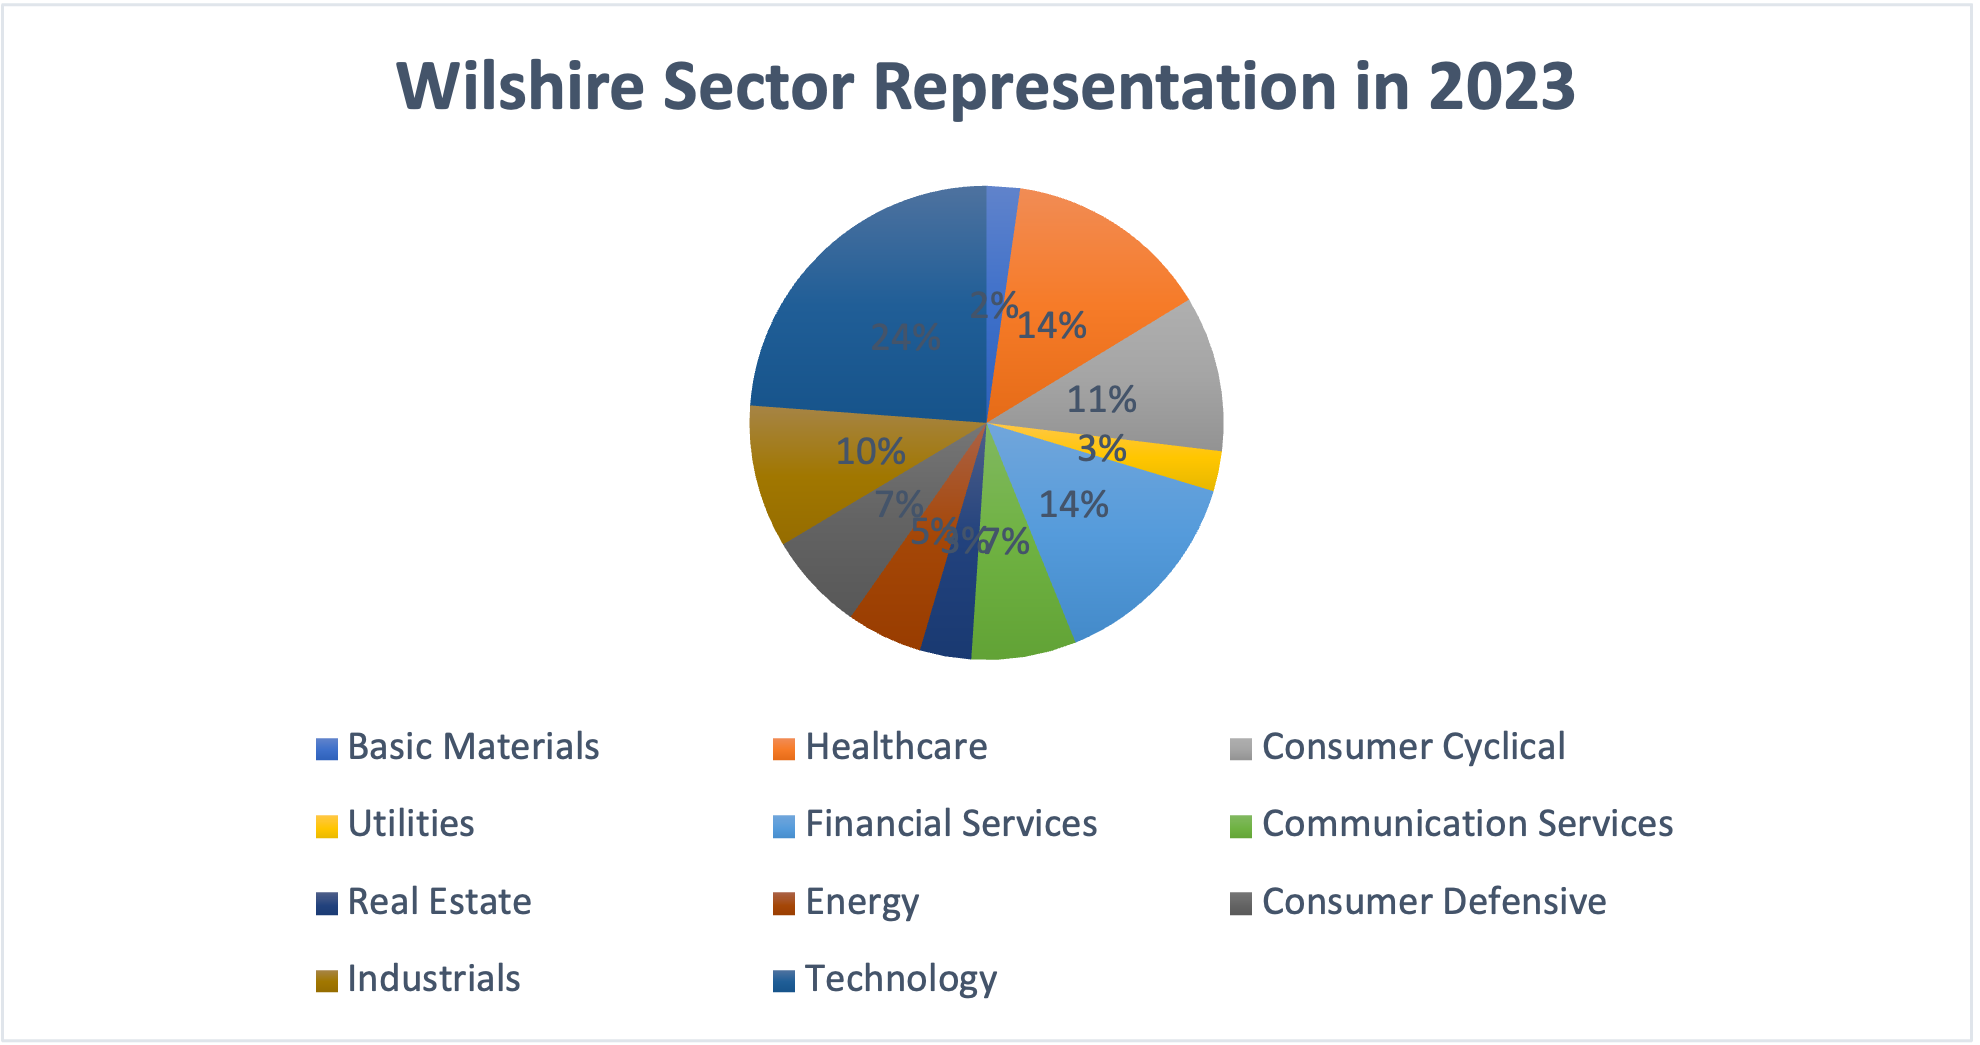 Sector representation in the Wilshire 5000 index